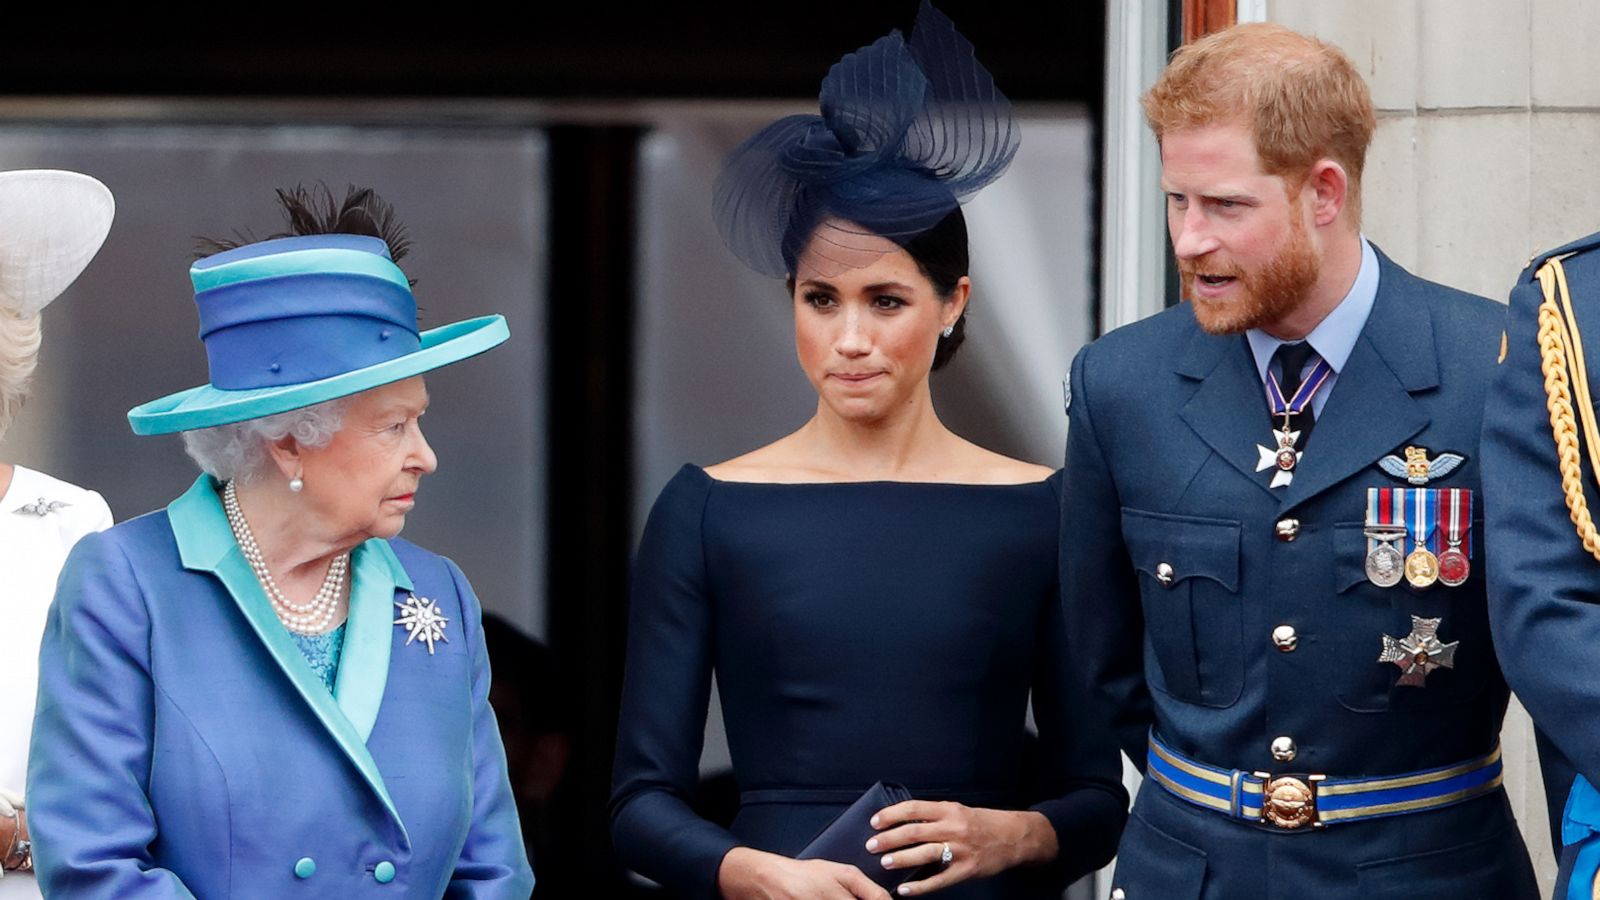 PHOTO: Queen Elizabeth II, Meghan, Duchess of Sussex and Prince Harry, Duke of Sussex watch a flypast to mark the centenary of the Royal Air Force from the balcony of Buckingham Palace on July 10, 2018 in London.